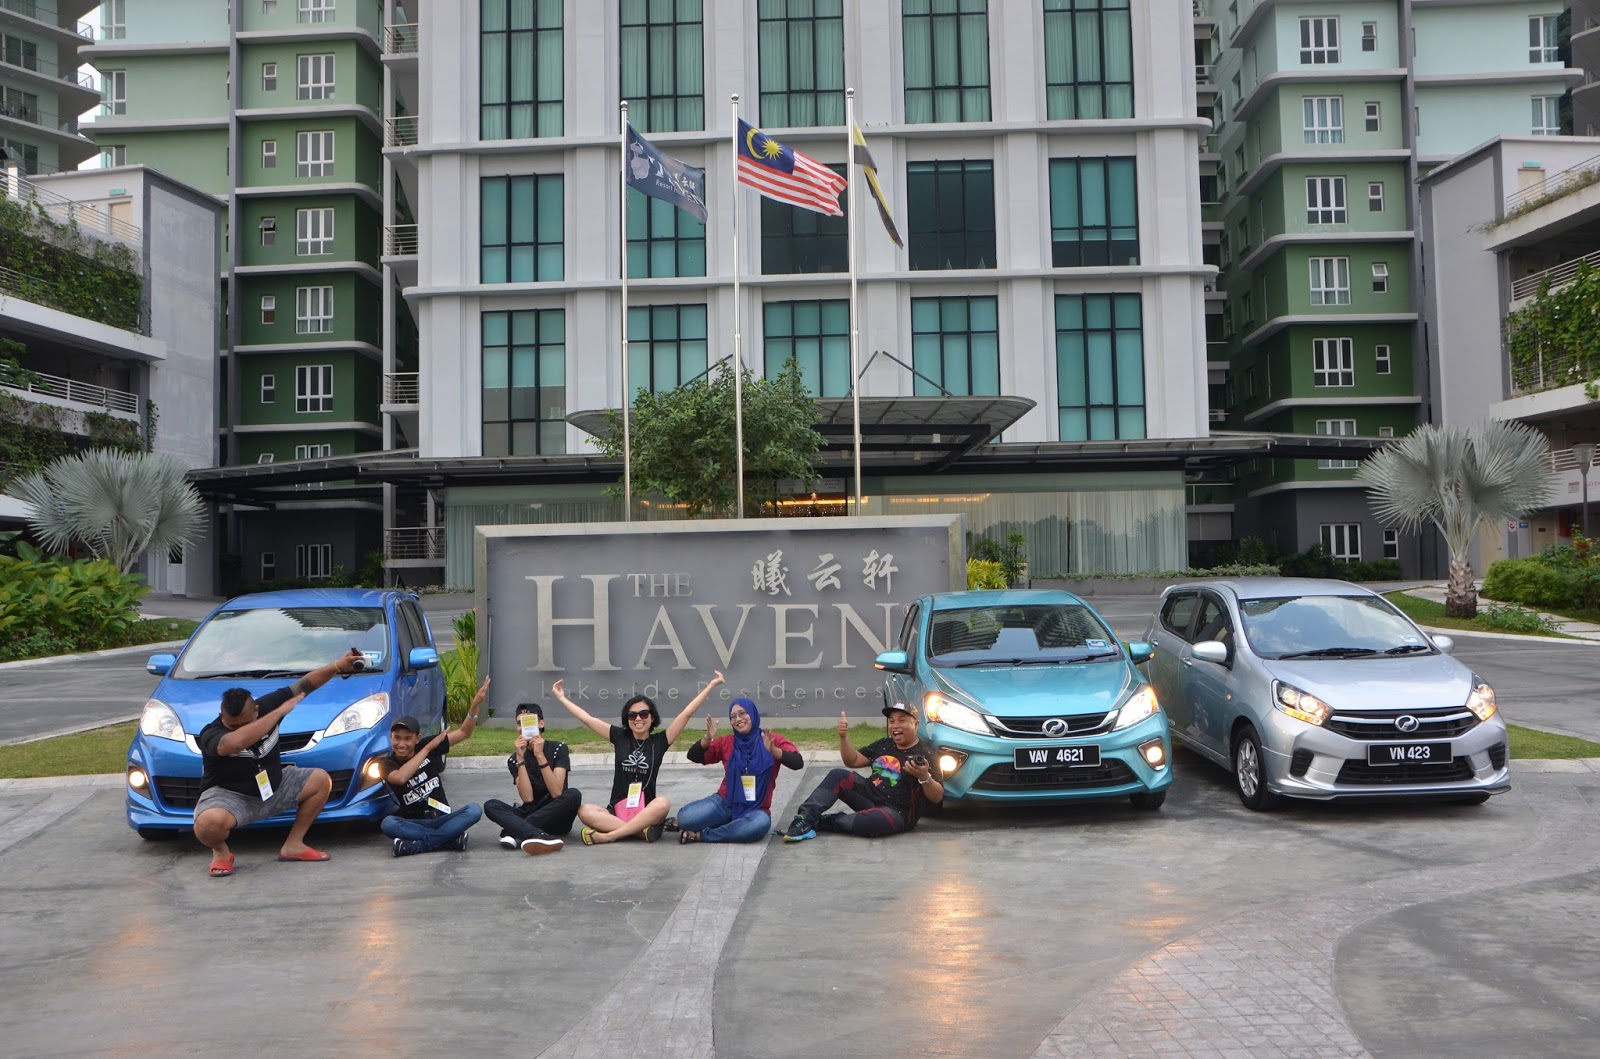 Discount [80% Off] The Haven Resort Hotel Ipoh All Suites Malaysia